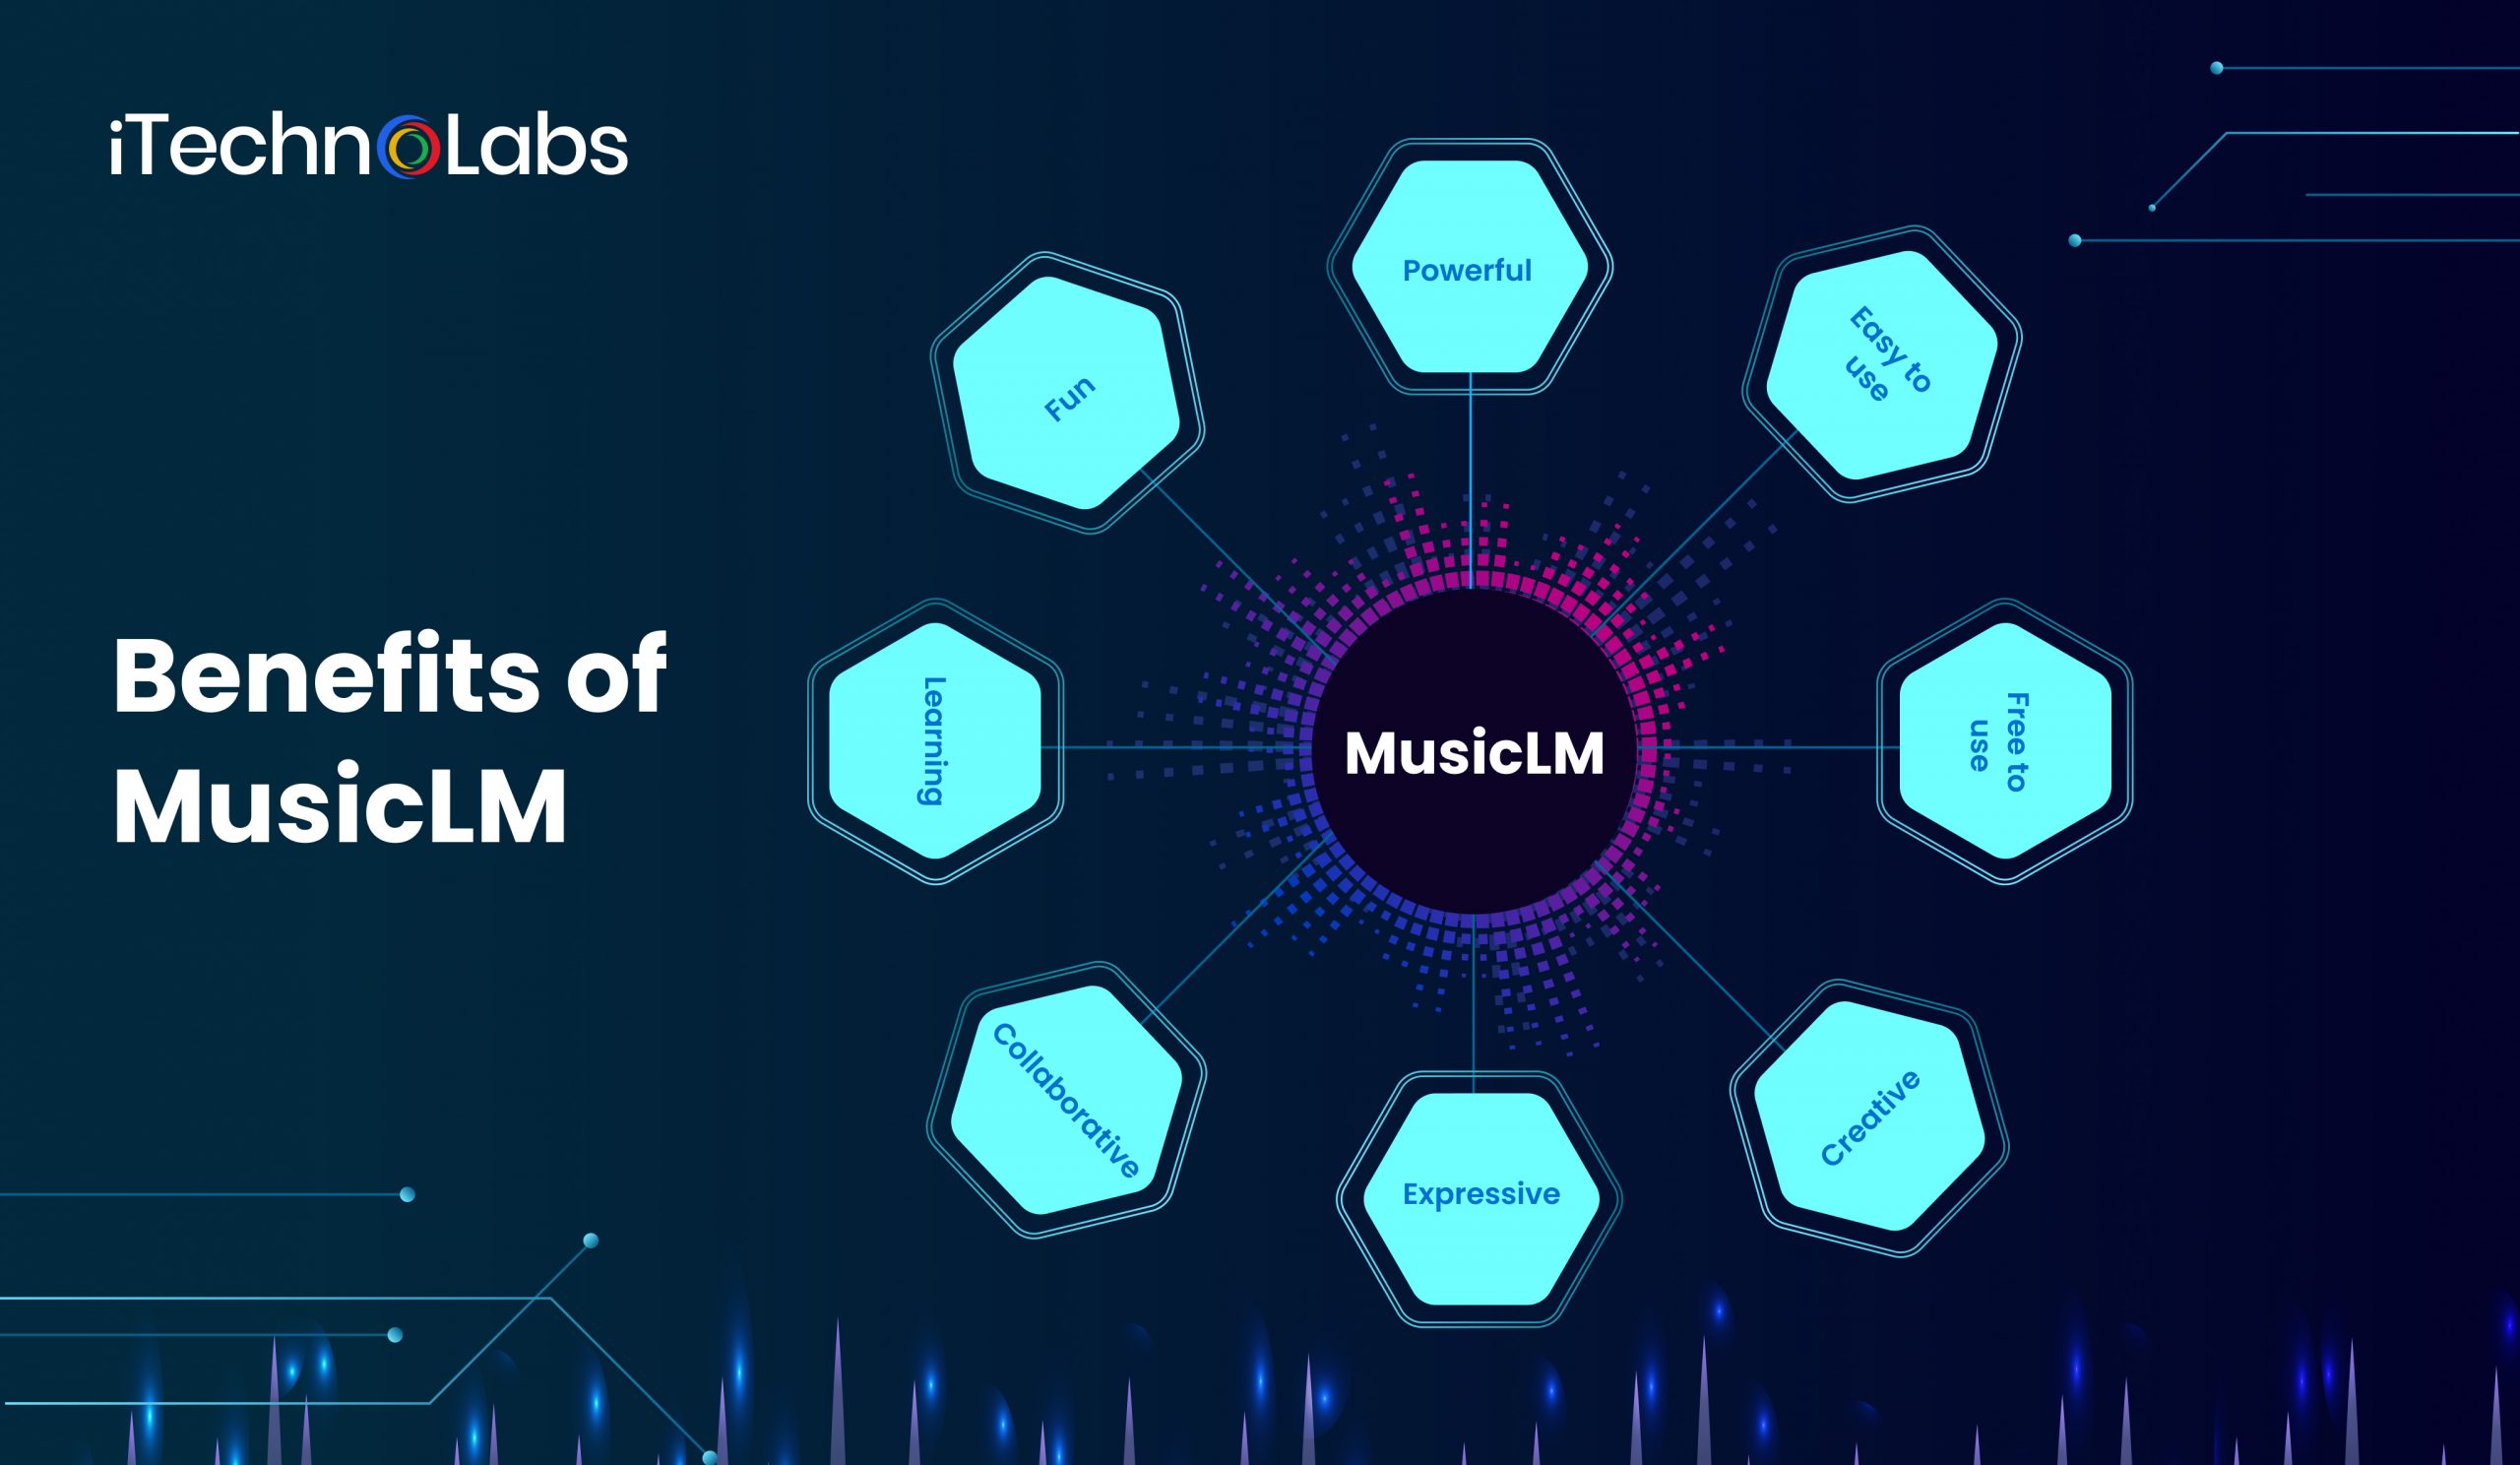 iTechnolabs-benefits of MusicLM